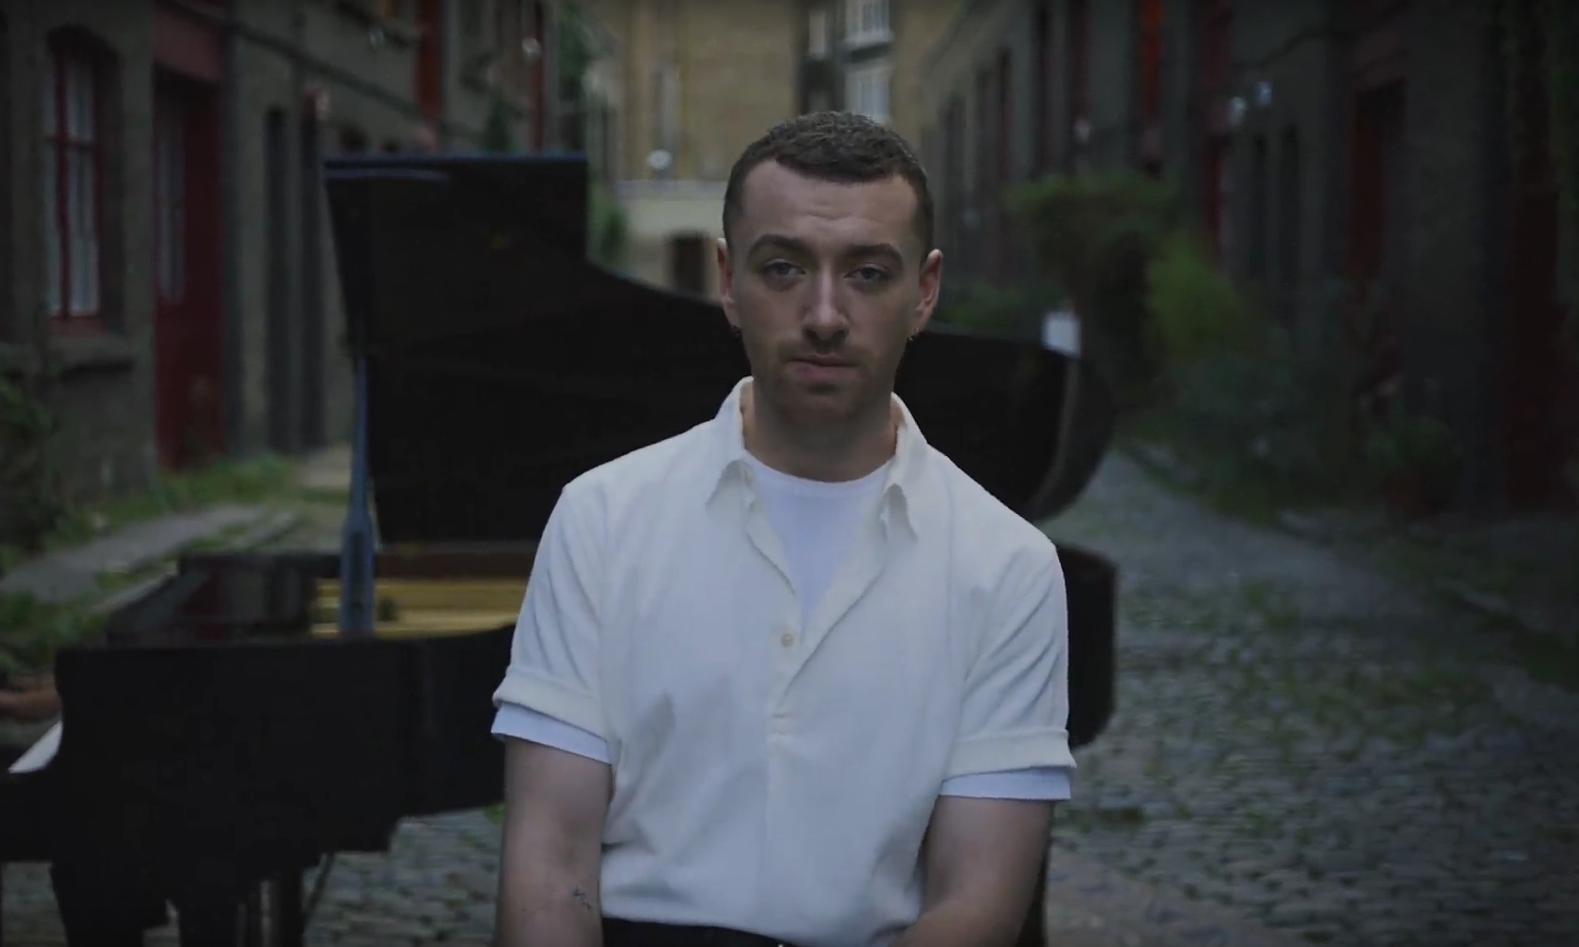 LE CLIP DU JOUR | SAM SMITH – “TOO GOOD AT GOODBYES” - TRACE